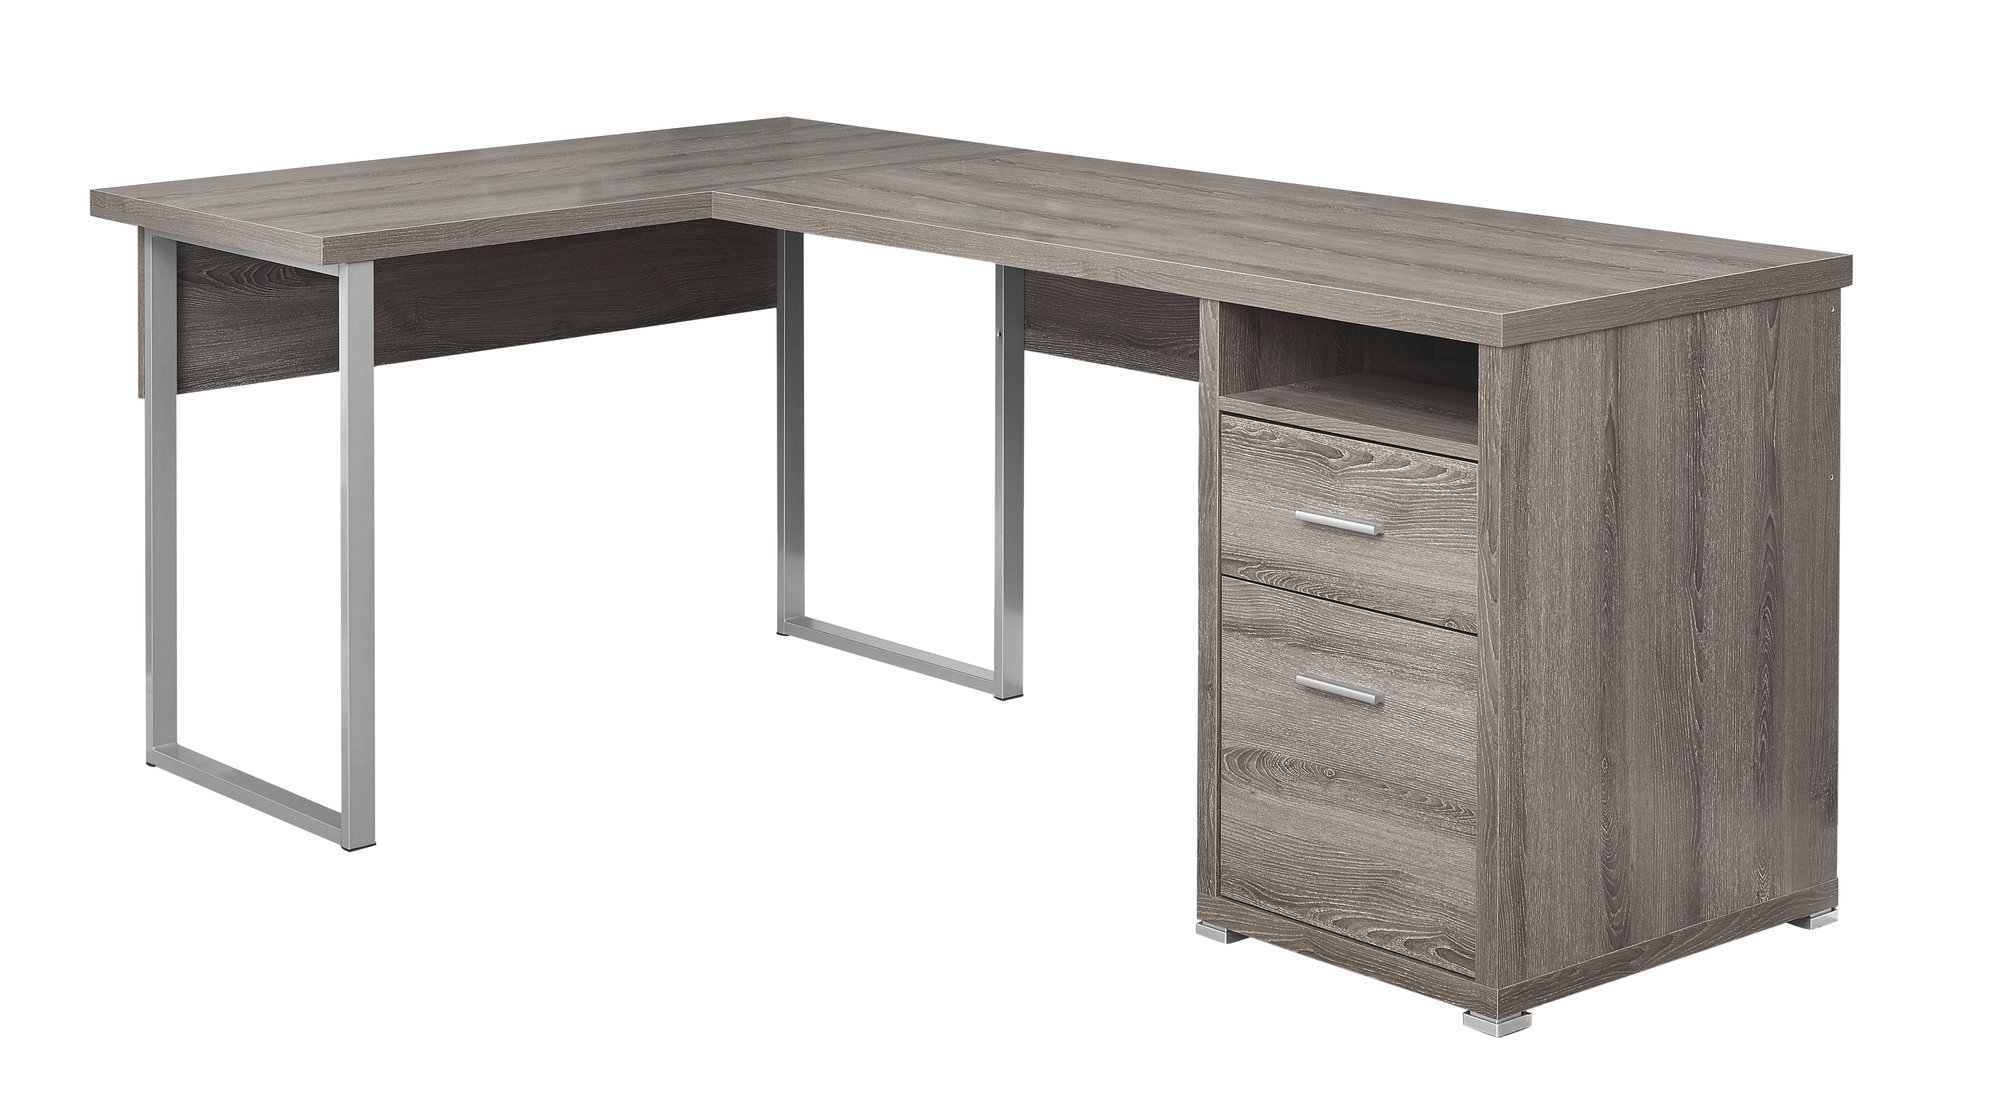 47.25" x 78.75" x 30" Dark Taupe Silver Particle Board Hollow Core Metal Computer Desk